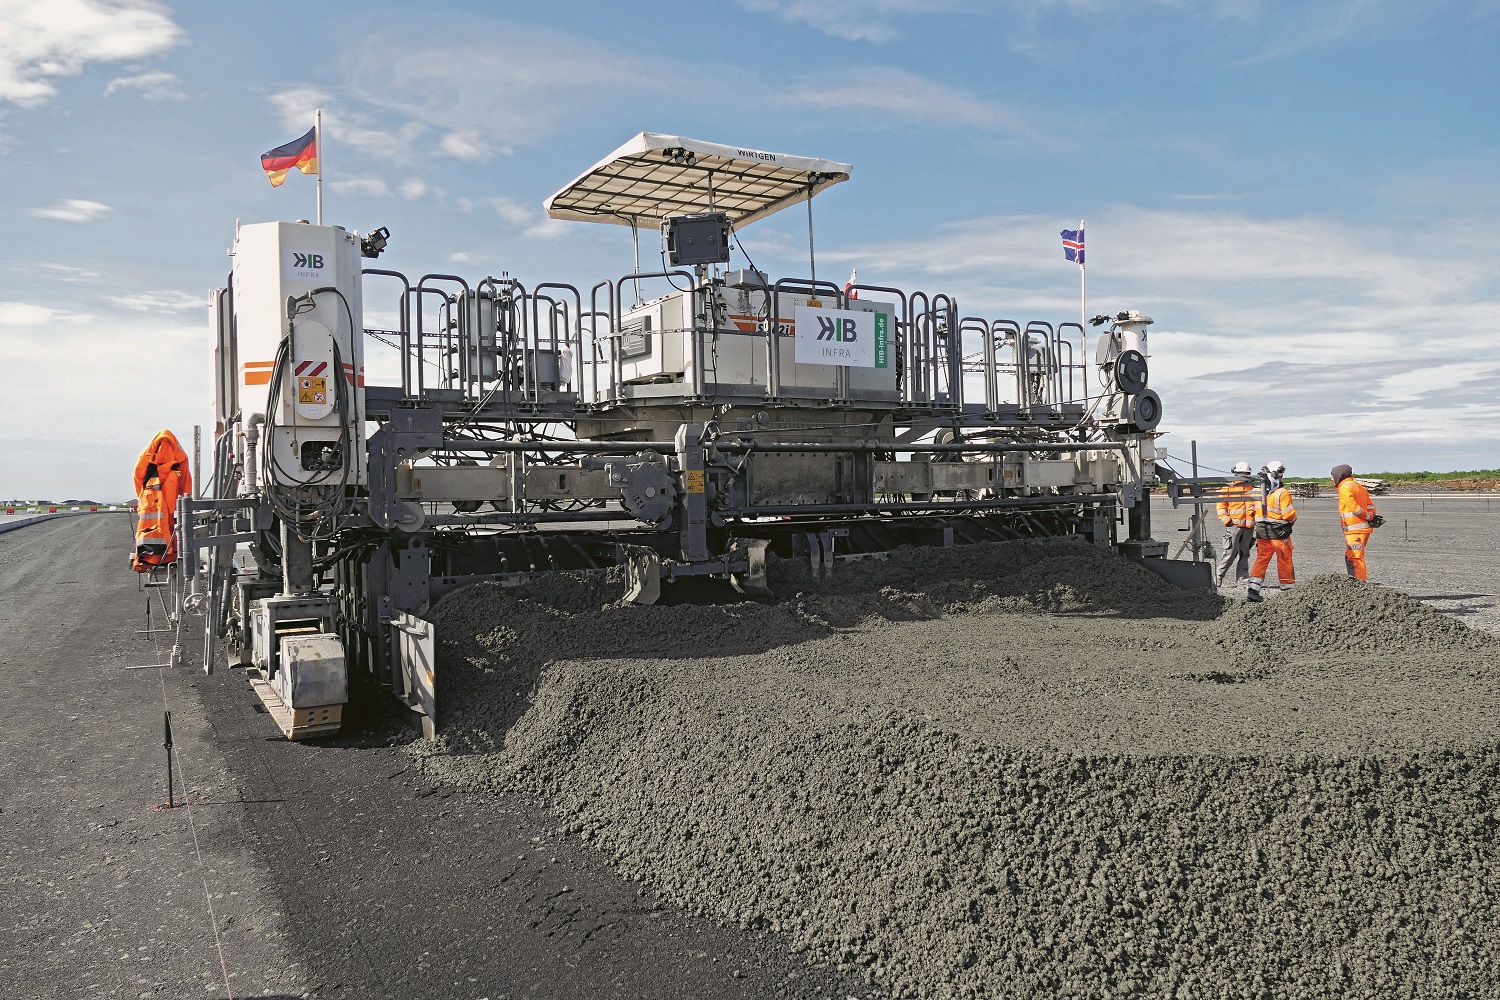 At Keflavik Air Base, the Wirtgen SP 62i delivered precise single-layer concrete paving with a width of 7.62 m (25 ft) and a thickness of between 41 cm (16 in) and 45 cm (18 in). 